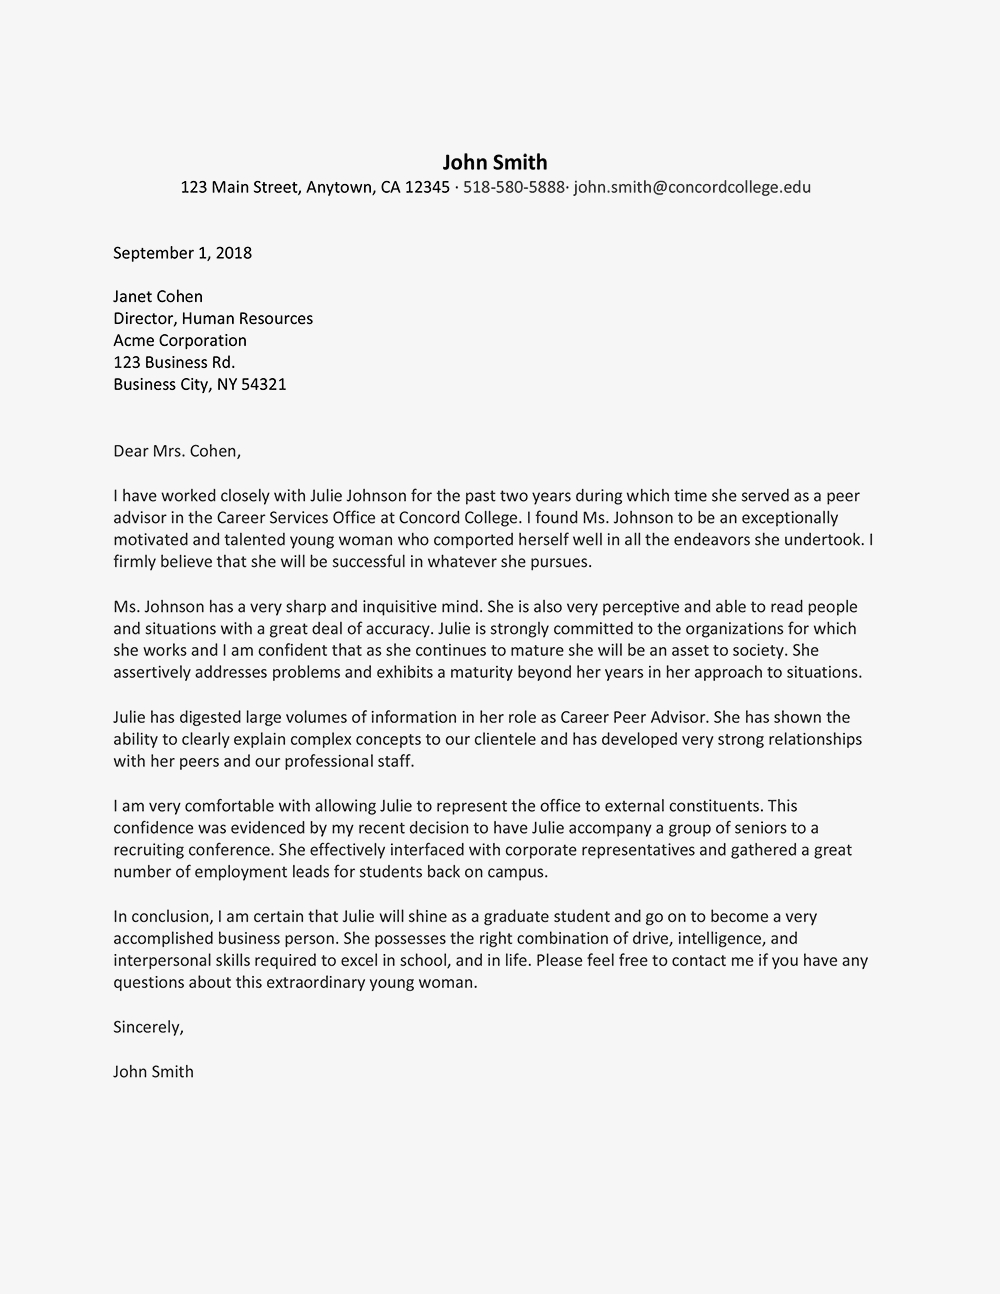 Letter Of Recommendation For Mba Program from howtostepmom.com